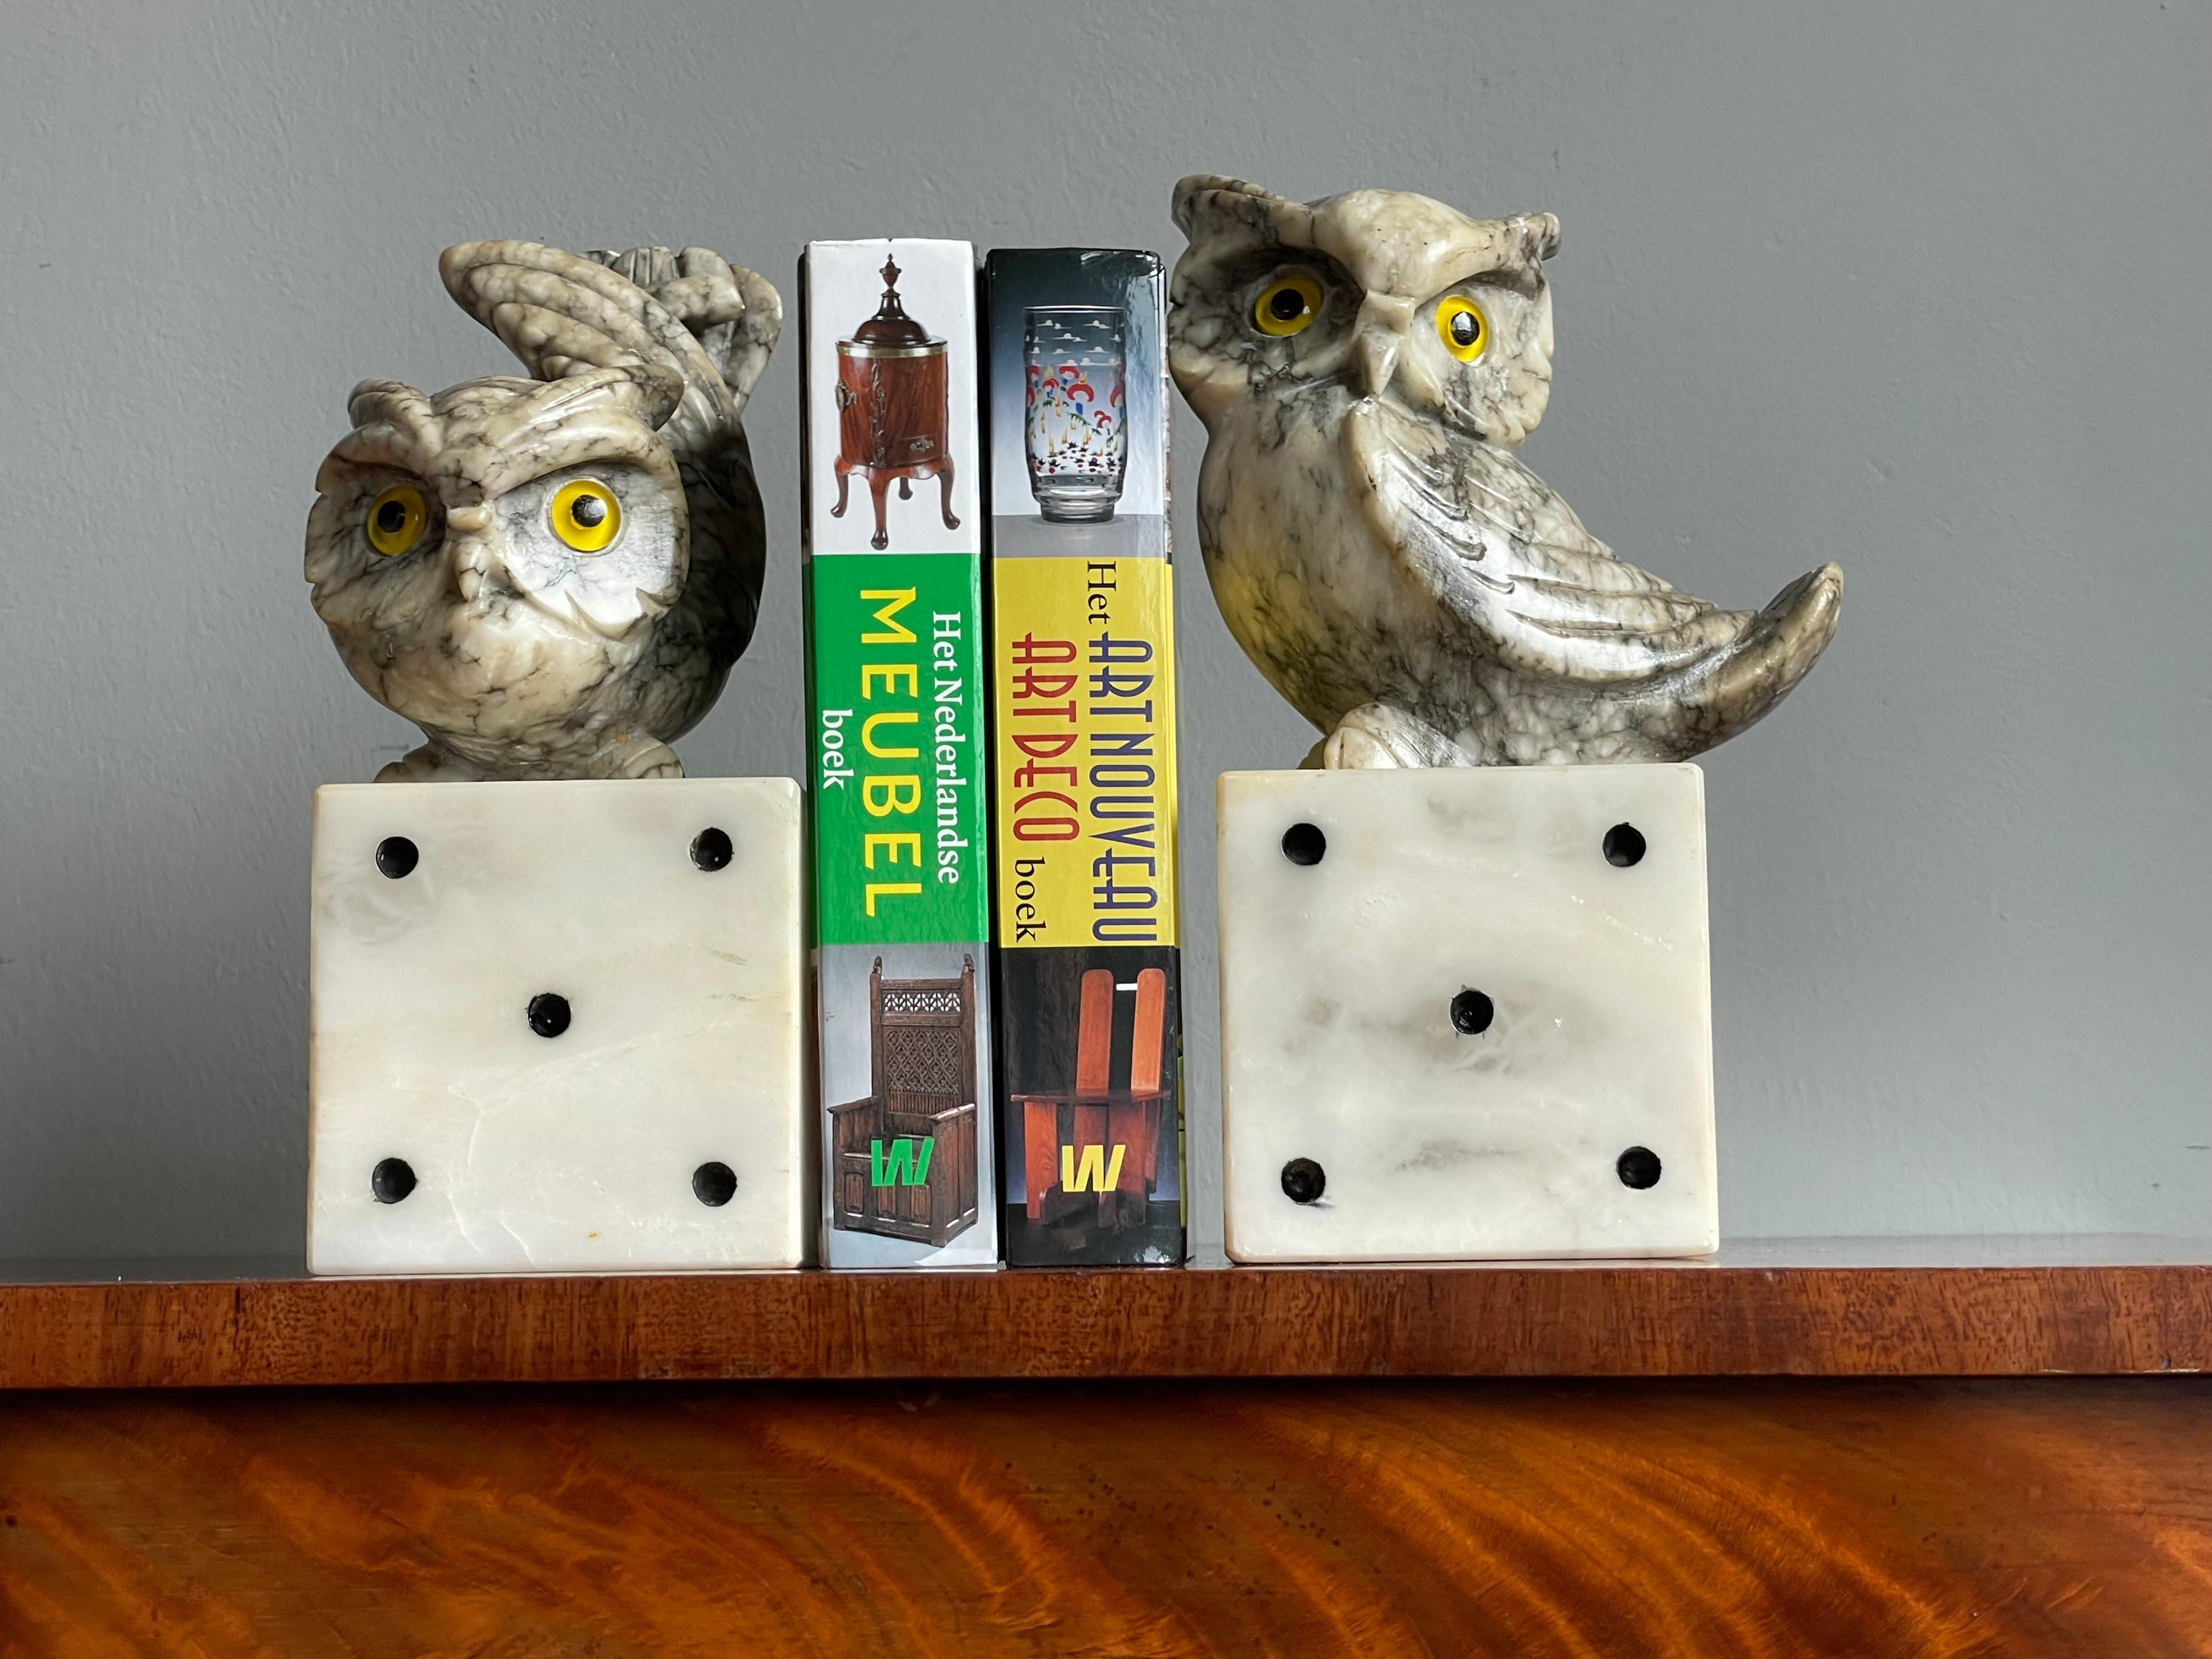 Beautiful, meaningful, practical and decorative mid-century bookends.

Given the fact that owls are the international symbol for wisdom and learning, these are the perfect sculptures for book-ends. These fine sized, hand-sculpted marble owls are